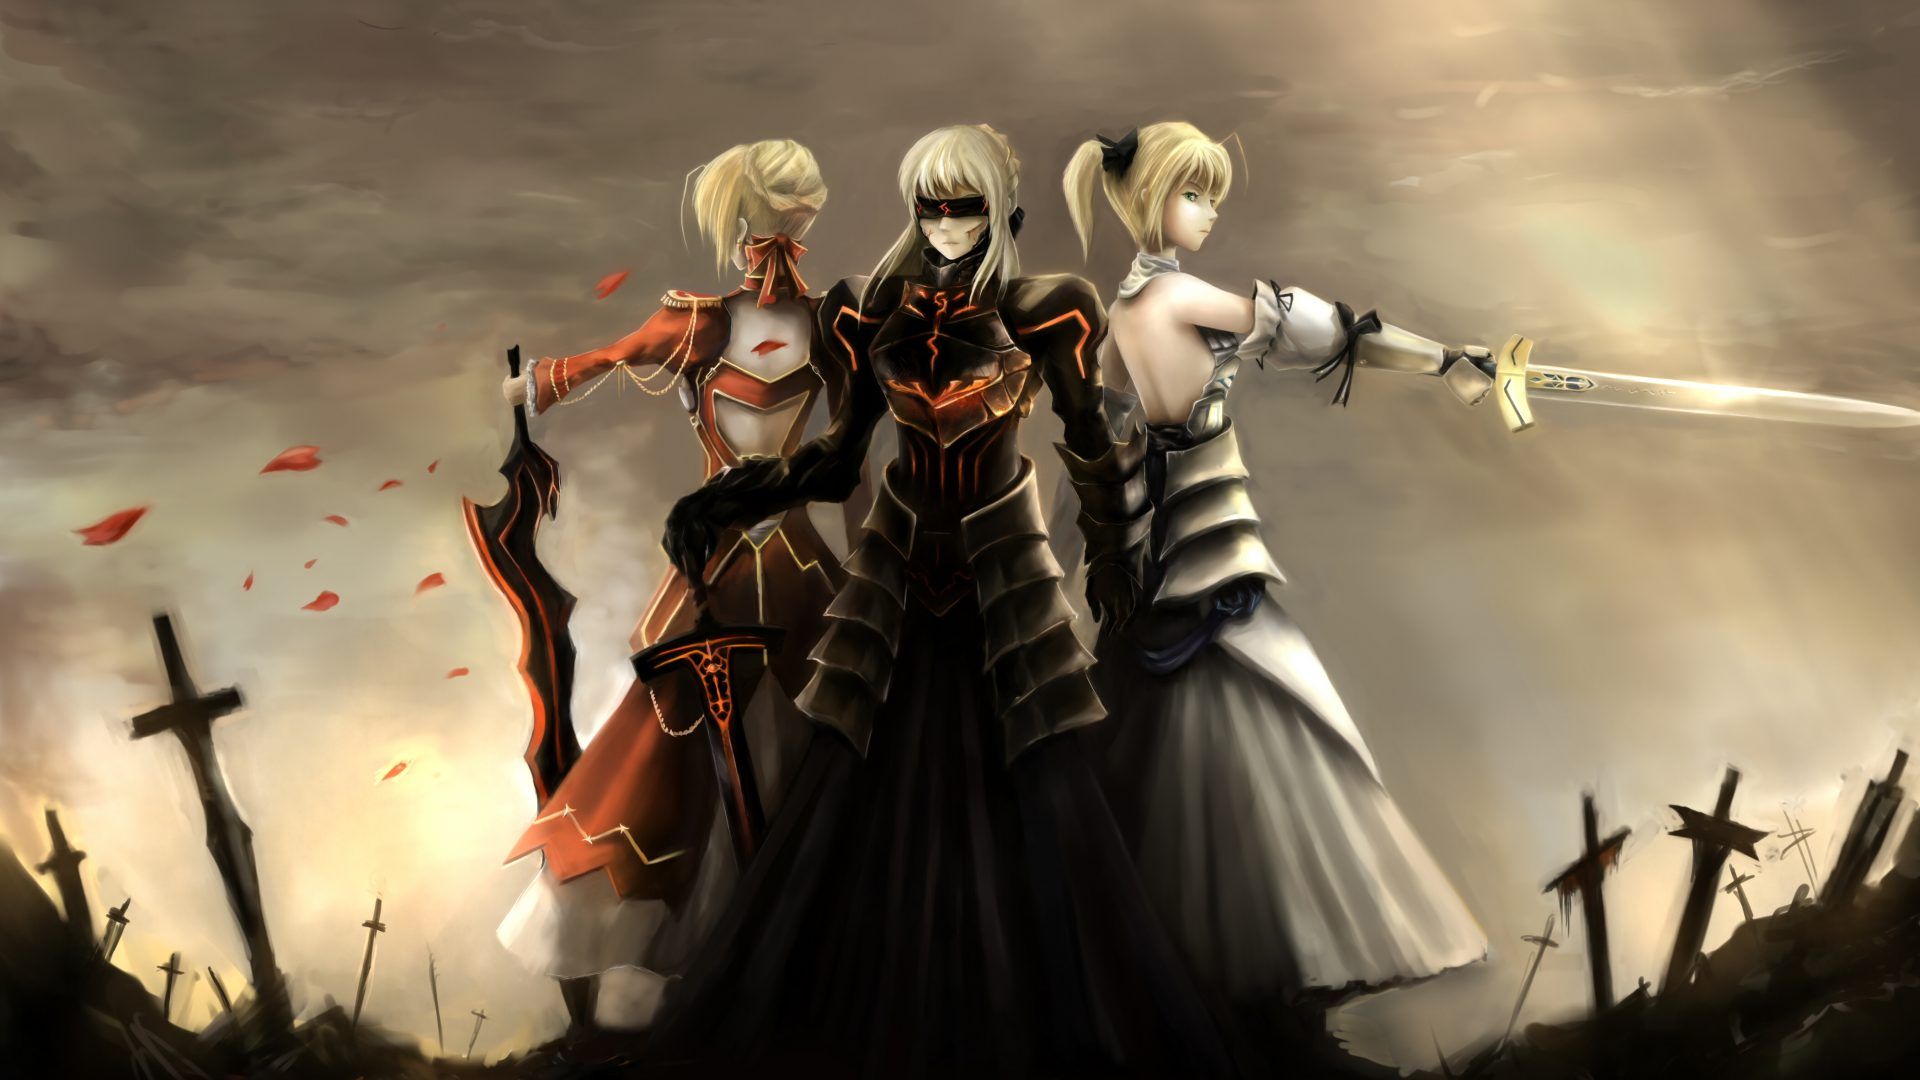 Laptop Anime Fate Zero Wallpapers - Wallpaper Cave